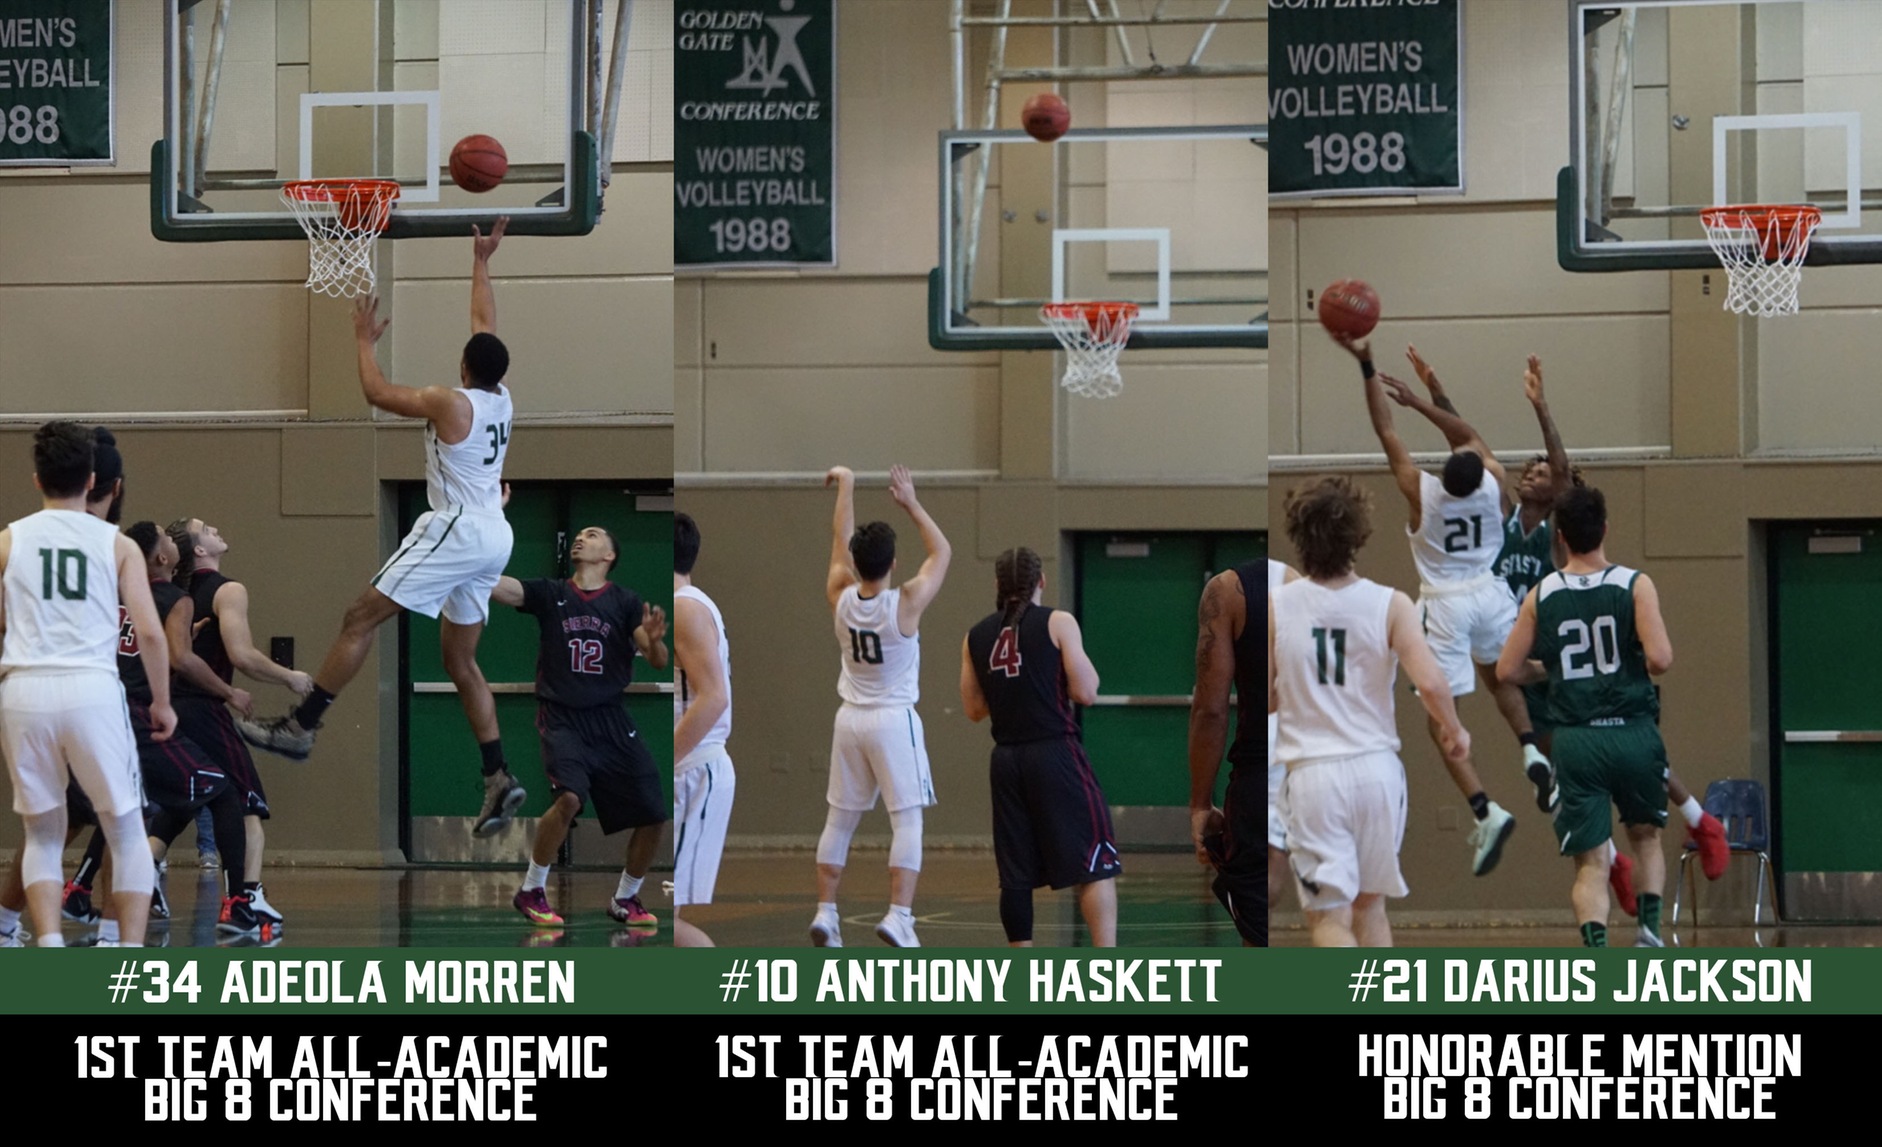 3 Men's Basketball players named to Big 8 Conference Teams